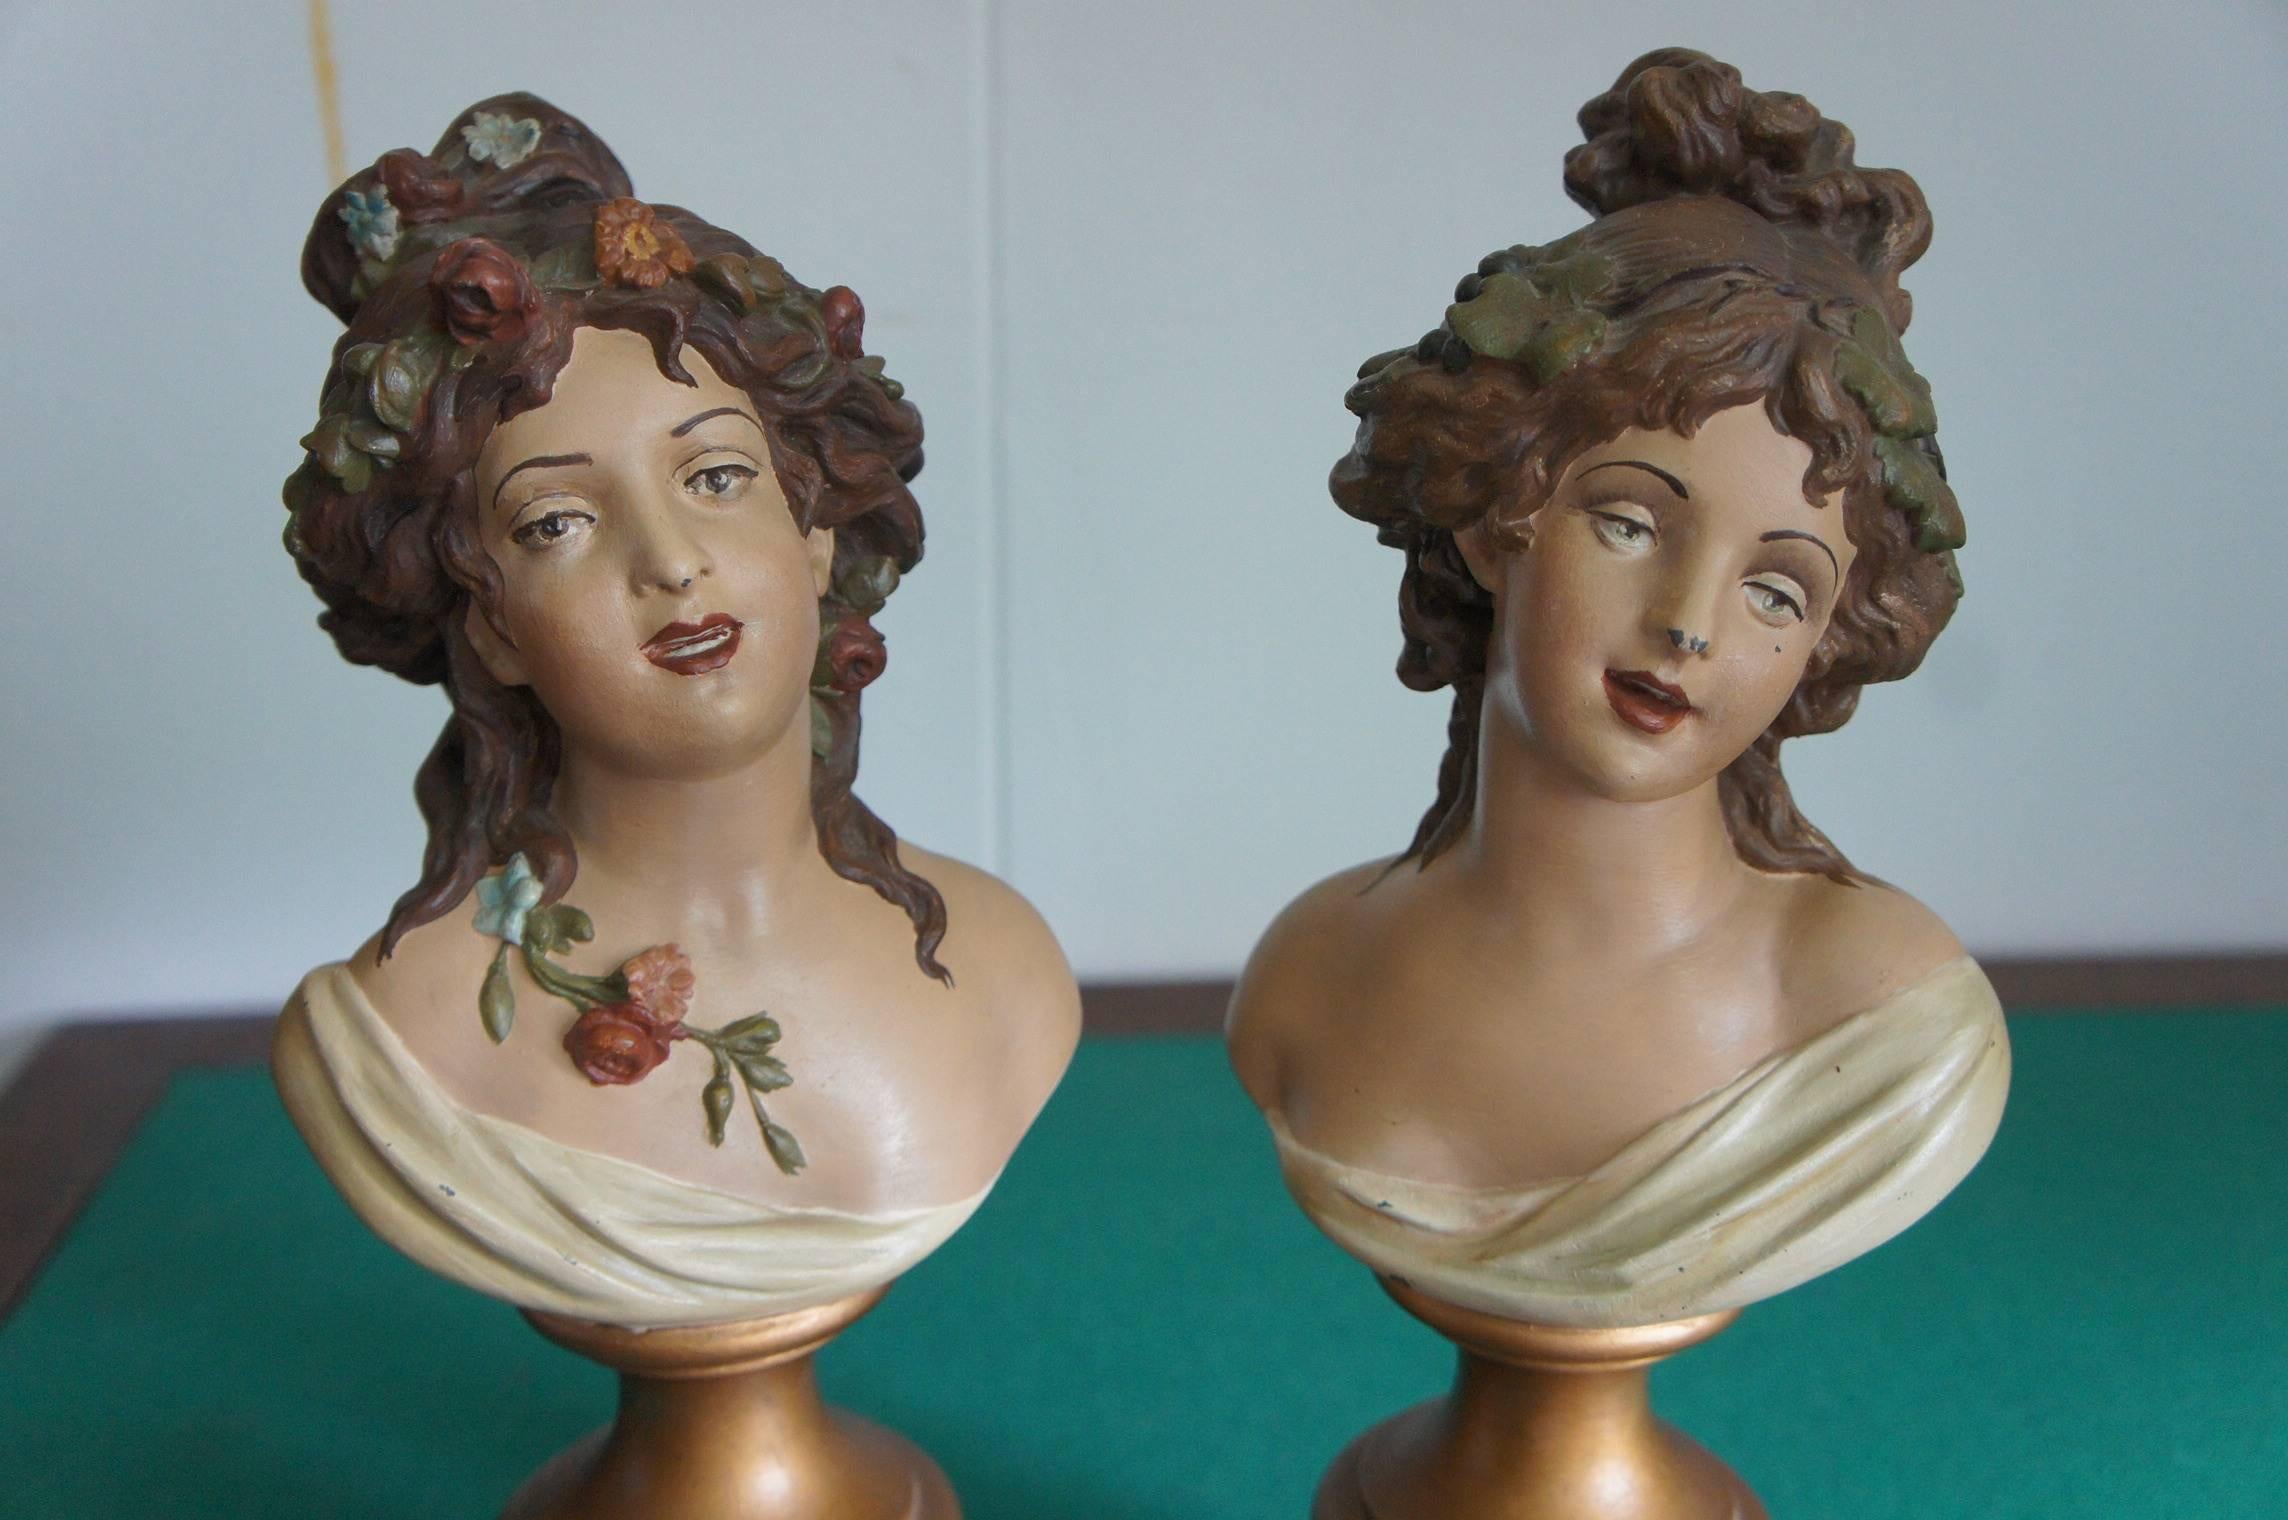 Rare pair of Rococo style lady sculptures in terra colors by Claude Michel, (1738-1814).

This beautiful pair of endearing and meaningful lady sculptures was originally made sometime in the late 1700s and the originals were cast in bronze. These